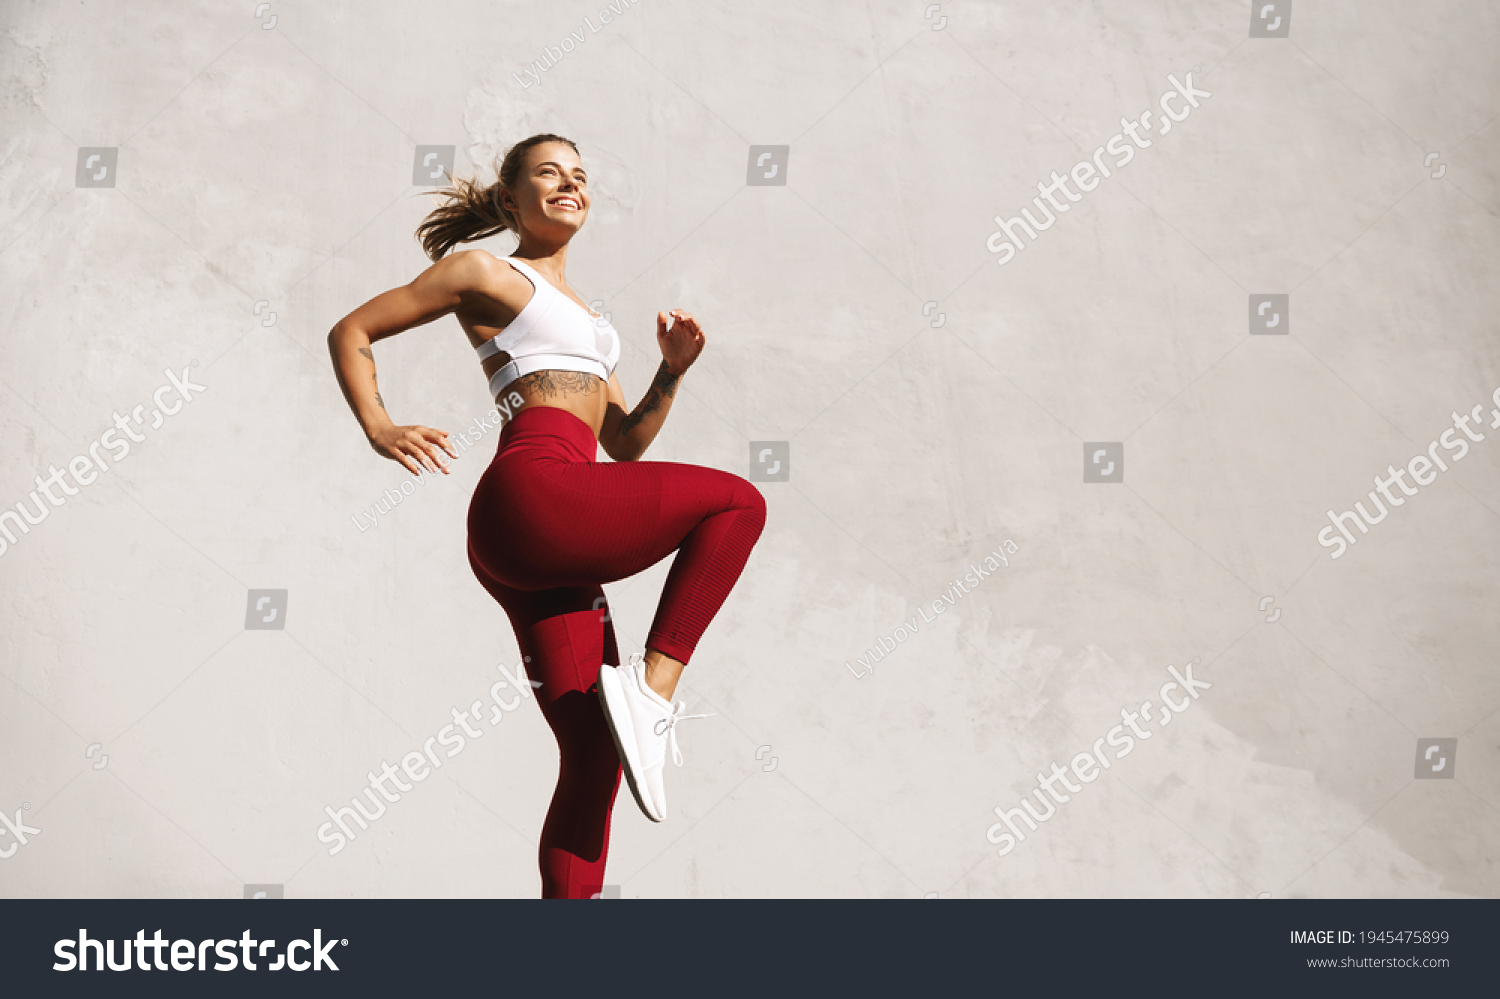 Fit woman exercising outdoors. Healthy young female athlete doing fitness workout. Sportswoman raising leg, do functional training outside on bright sunny day, smiling pleased, wearing sport outfit #1945475899